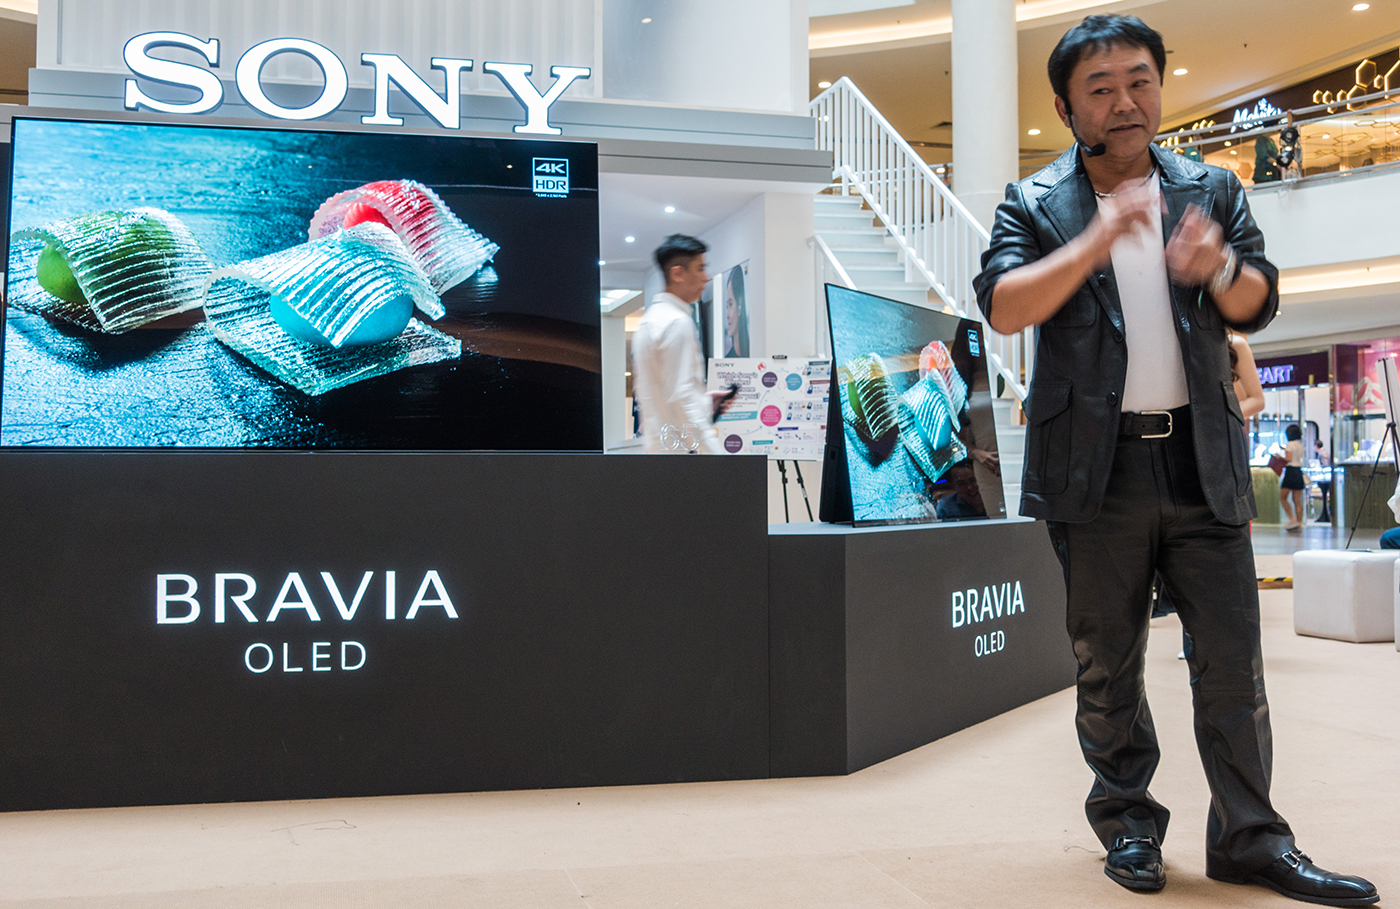 Sony launches new A9F OLED TV Master line 